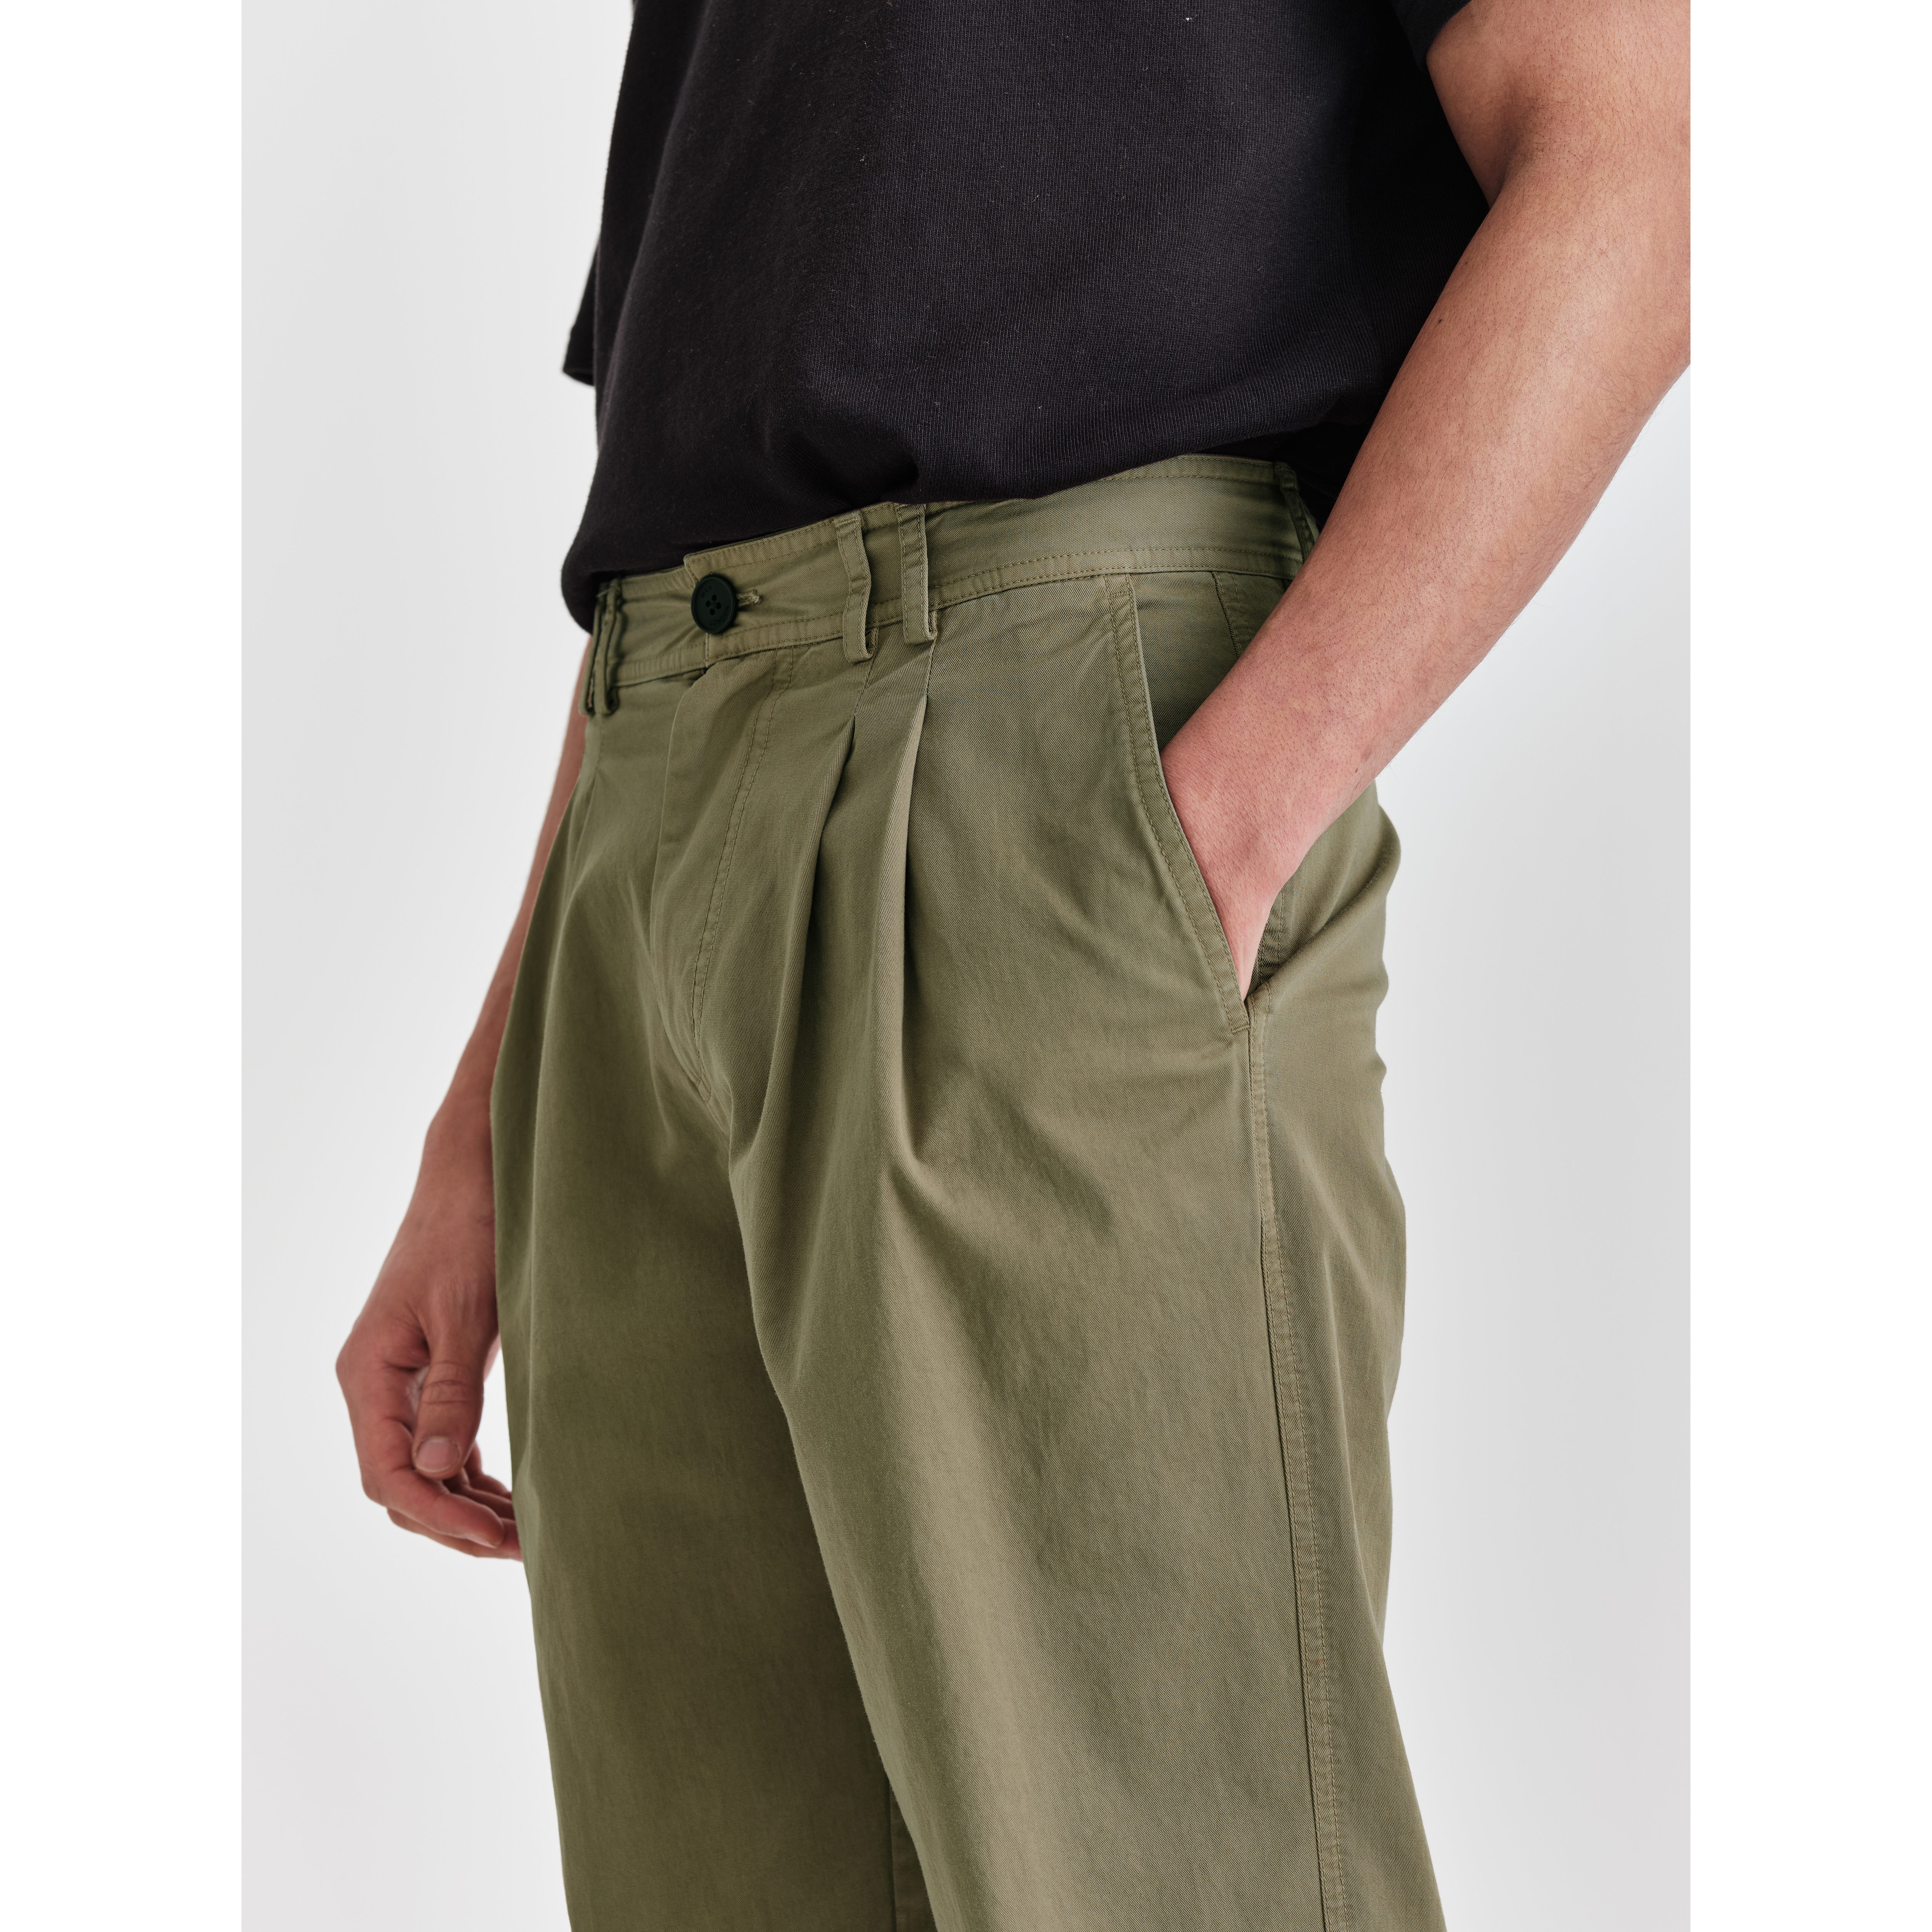 Original Twill Pant - Model M1 Relaxed Fit Plain Front in British Khaki by  Bills Khakis - Hansen's Clothing